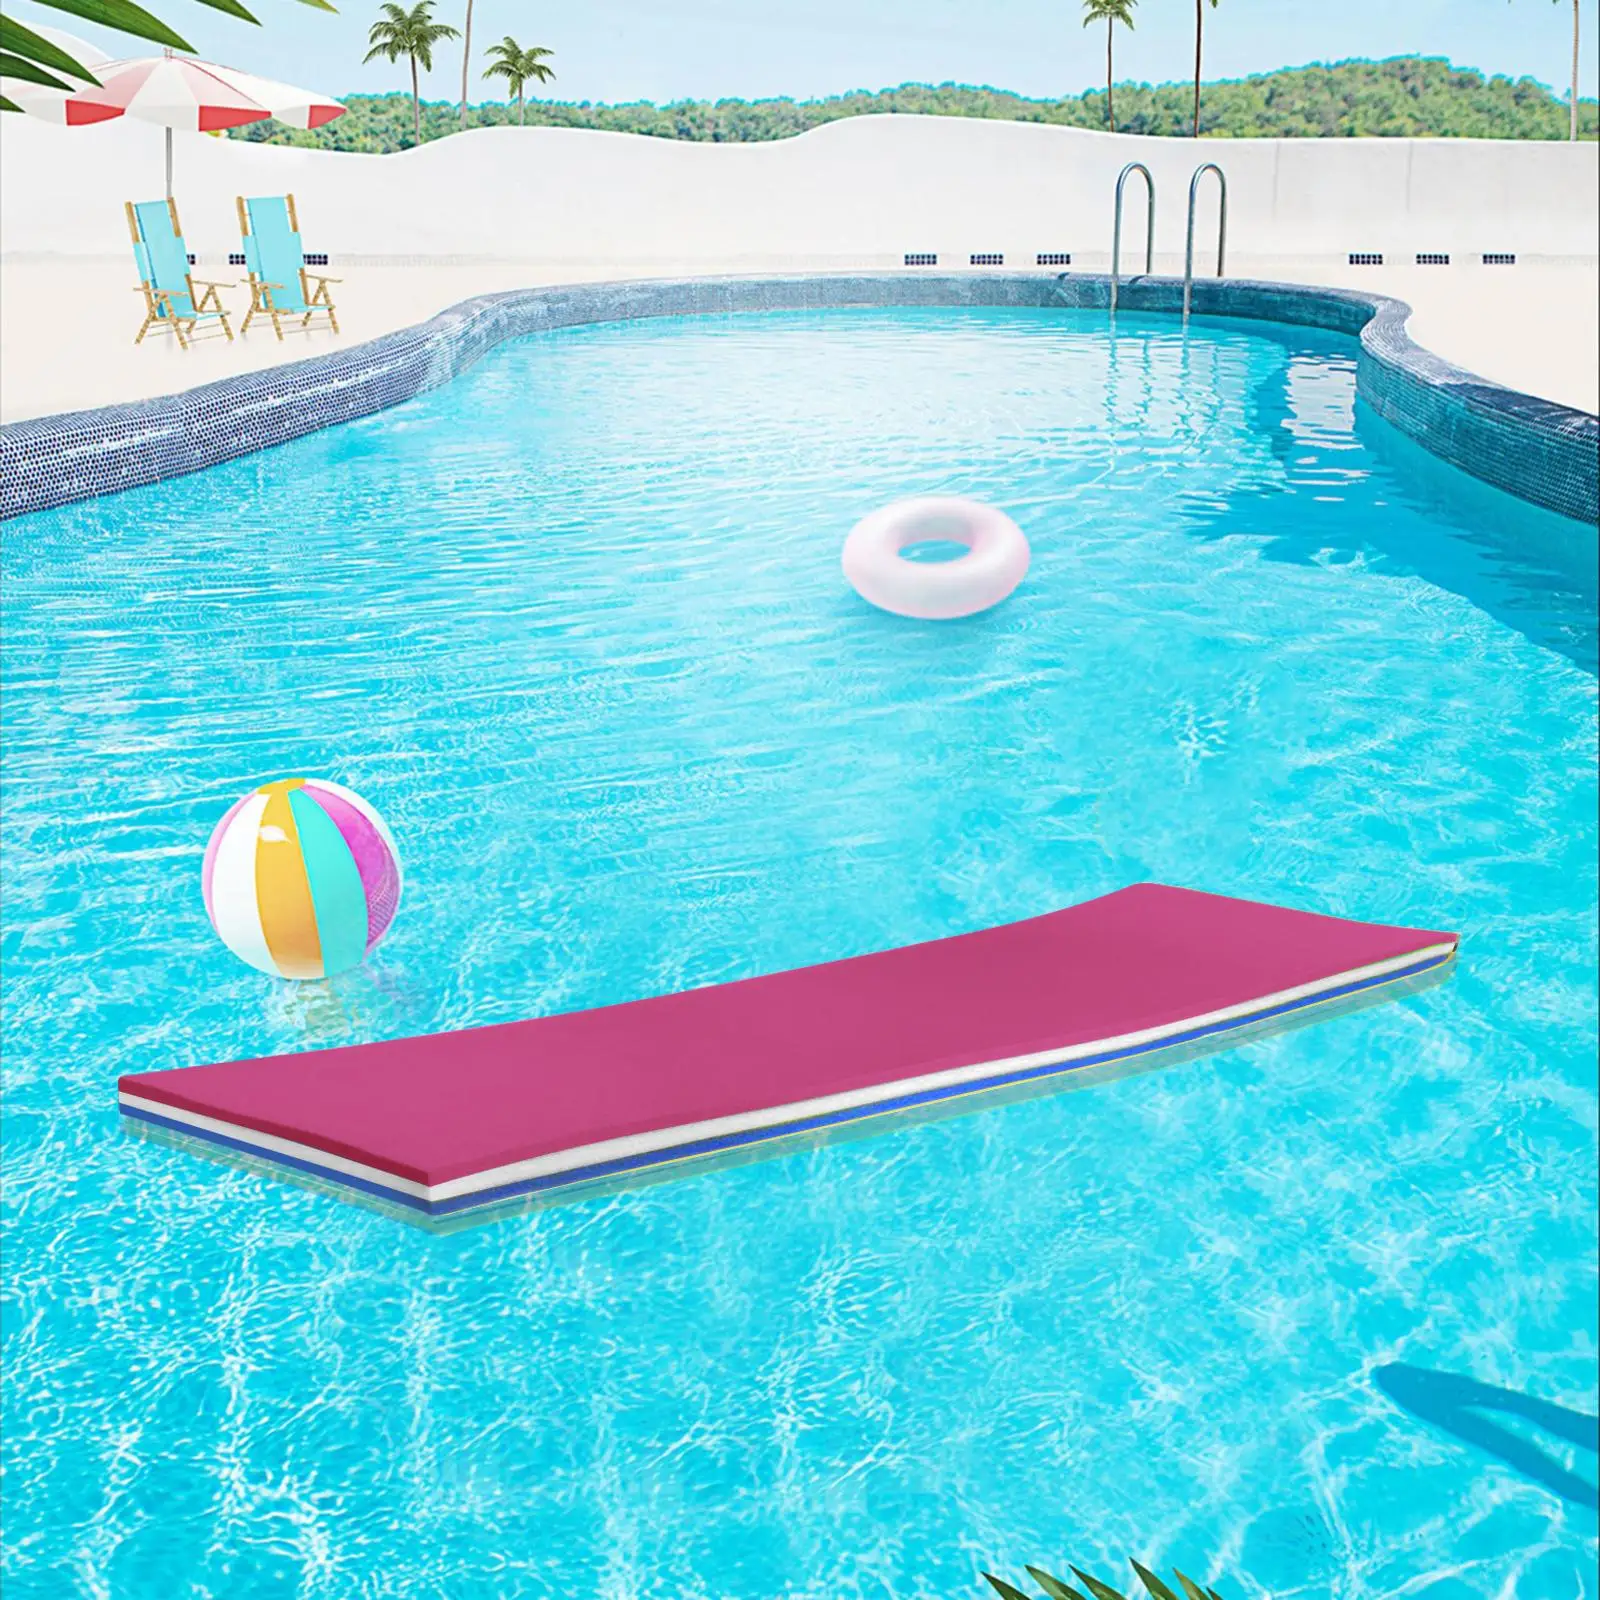 Floating Mat Pad Cushion 3 Layer 110cmx40x3.2cm for River Swimming Pool Summer Sturdy Portable Water Bed Pink White Blue